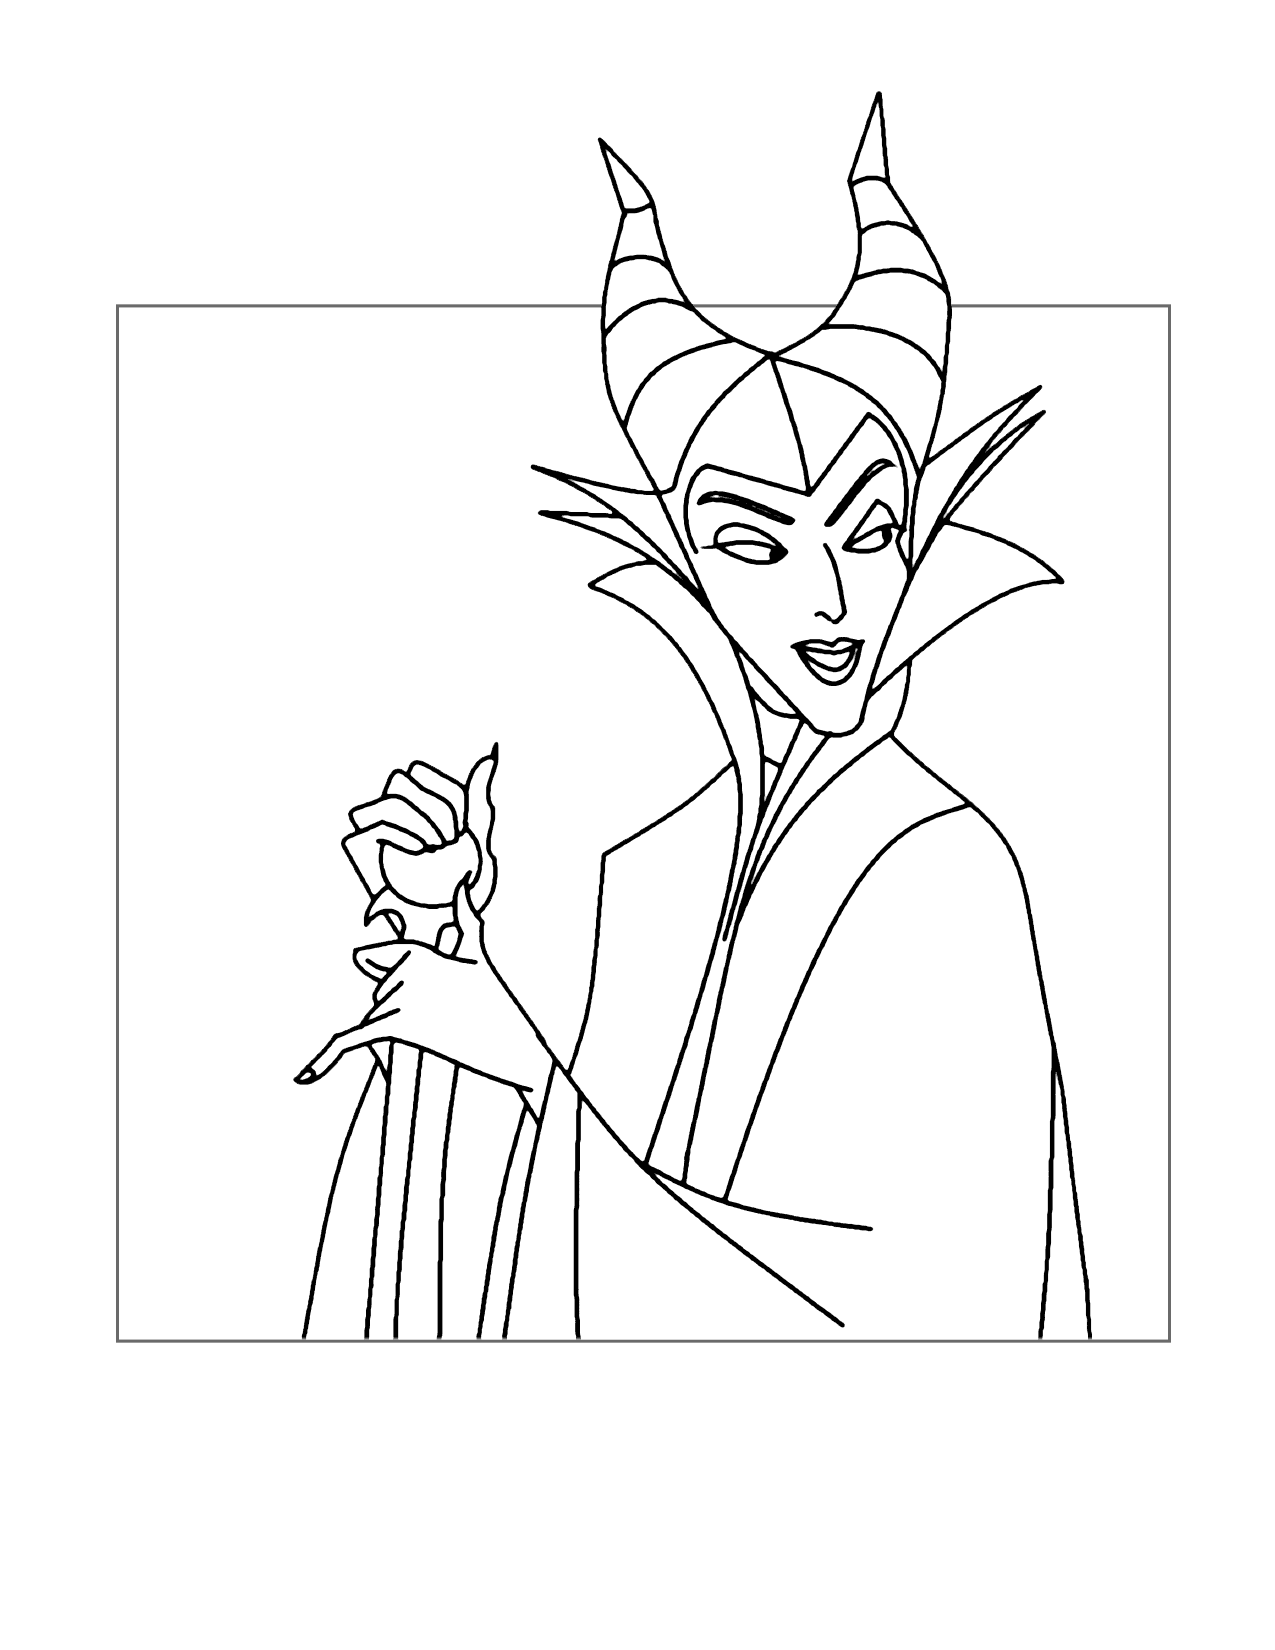 Maleficent Coloring Sheet